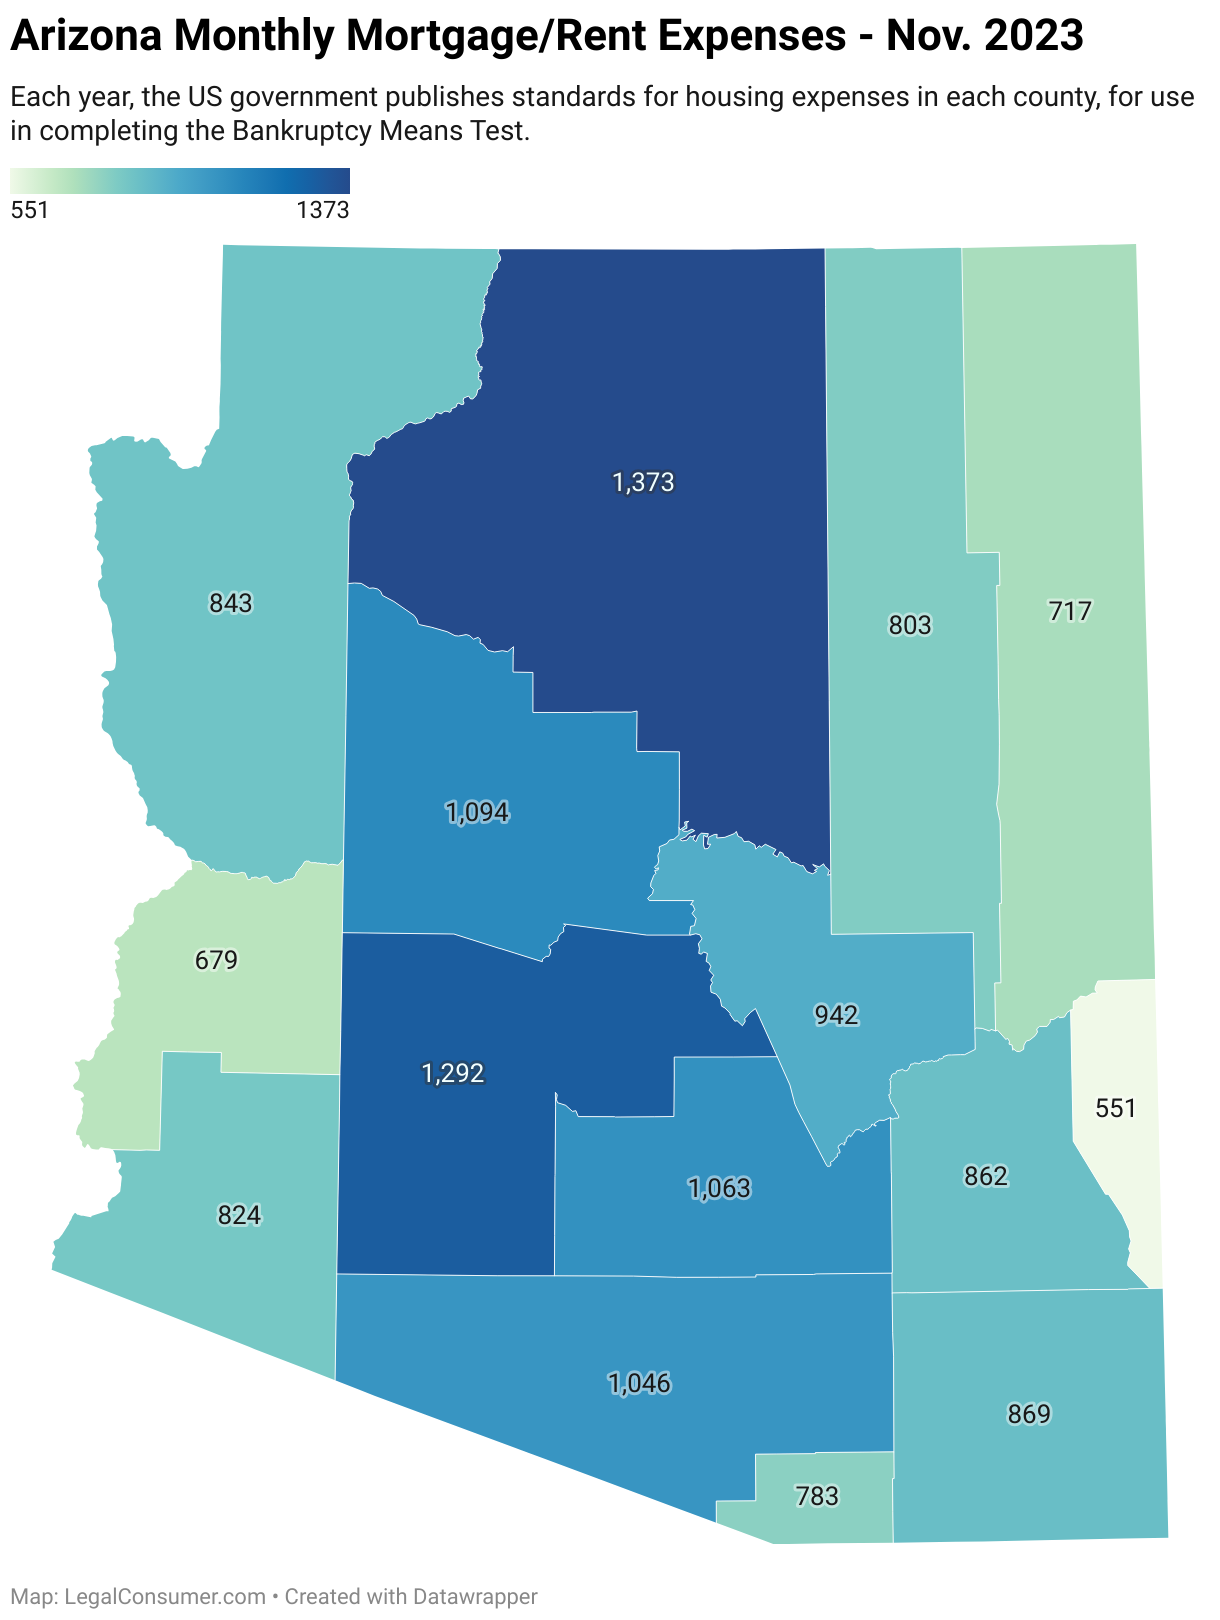 Map of Arizona Housing Expenses for Bankruptcy Means Test